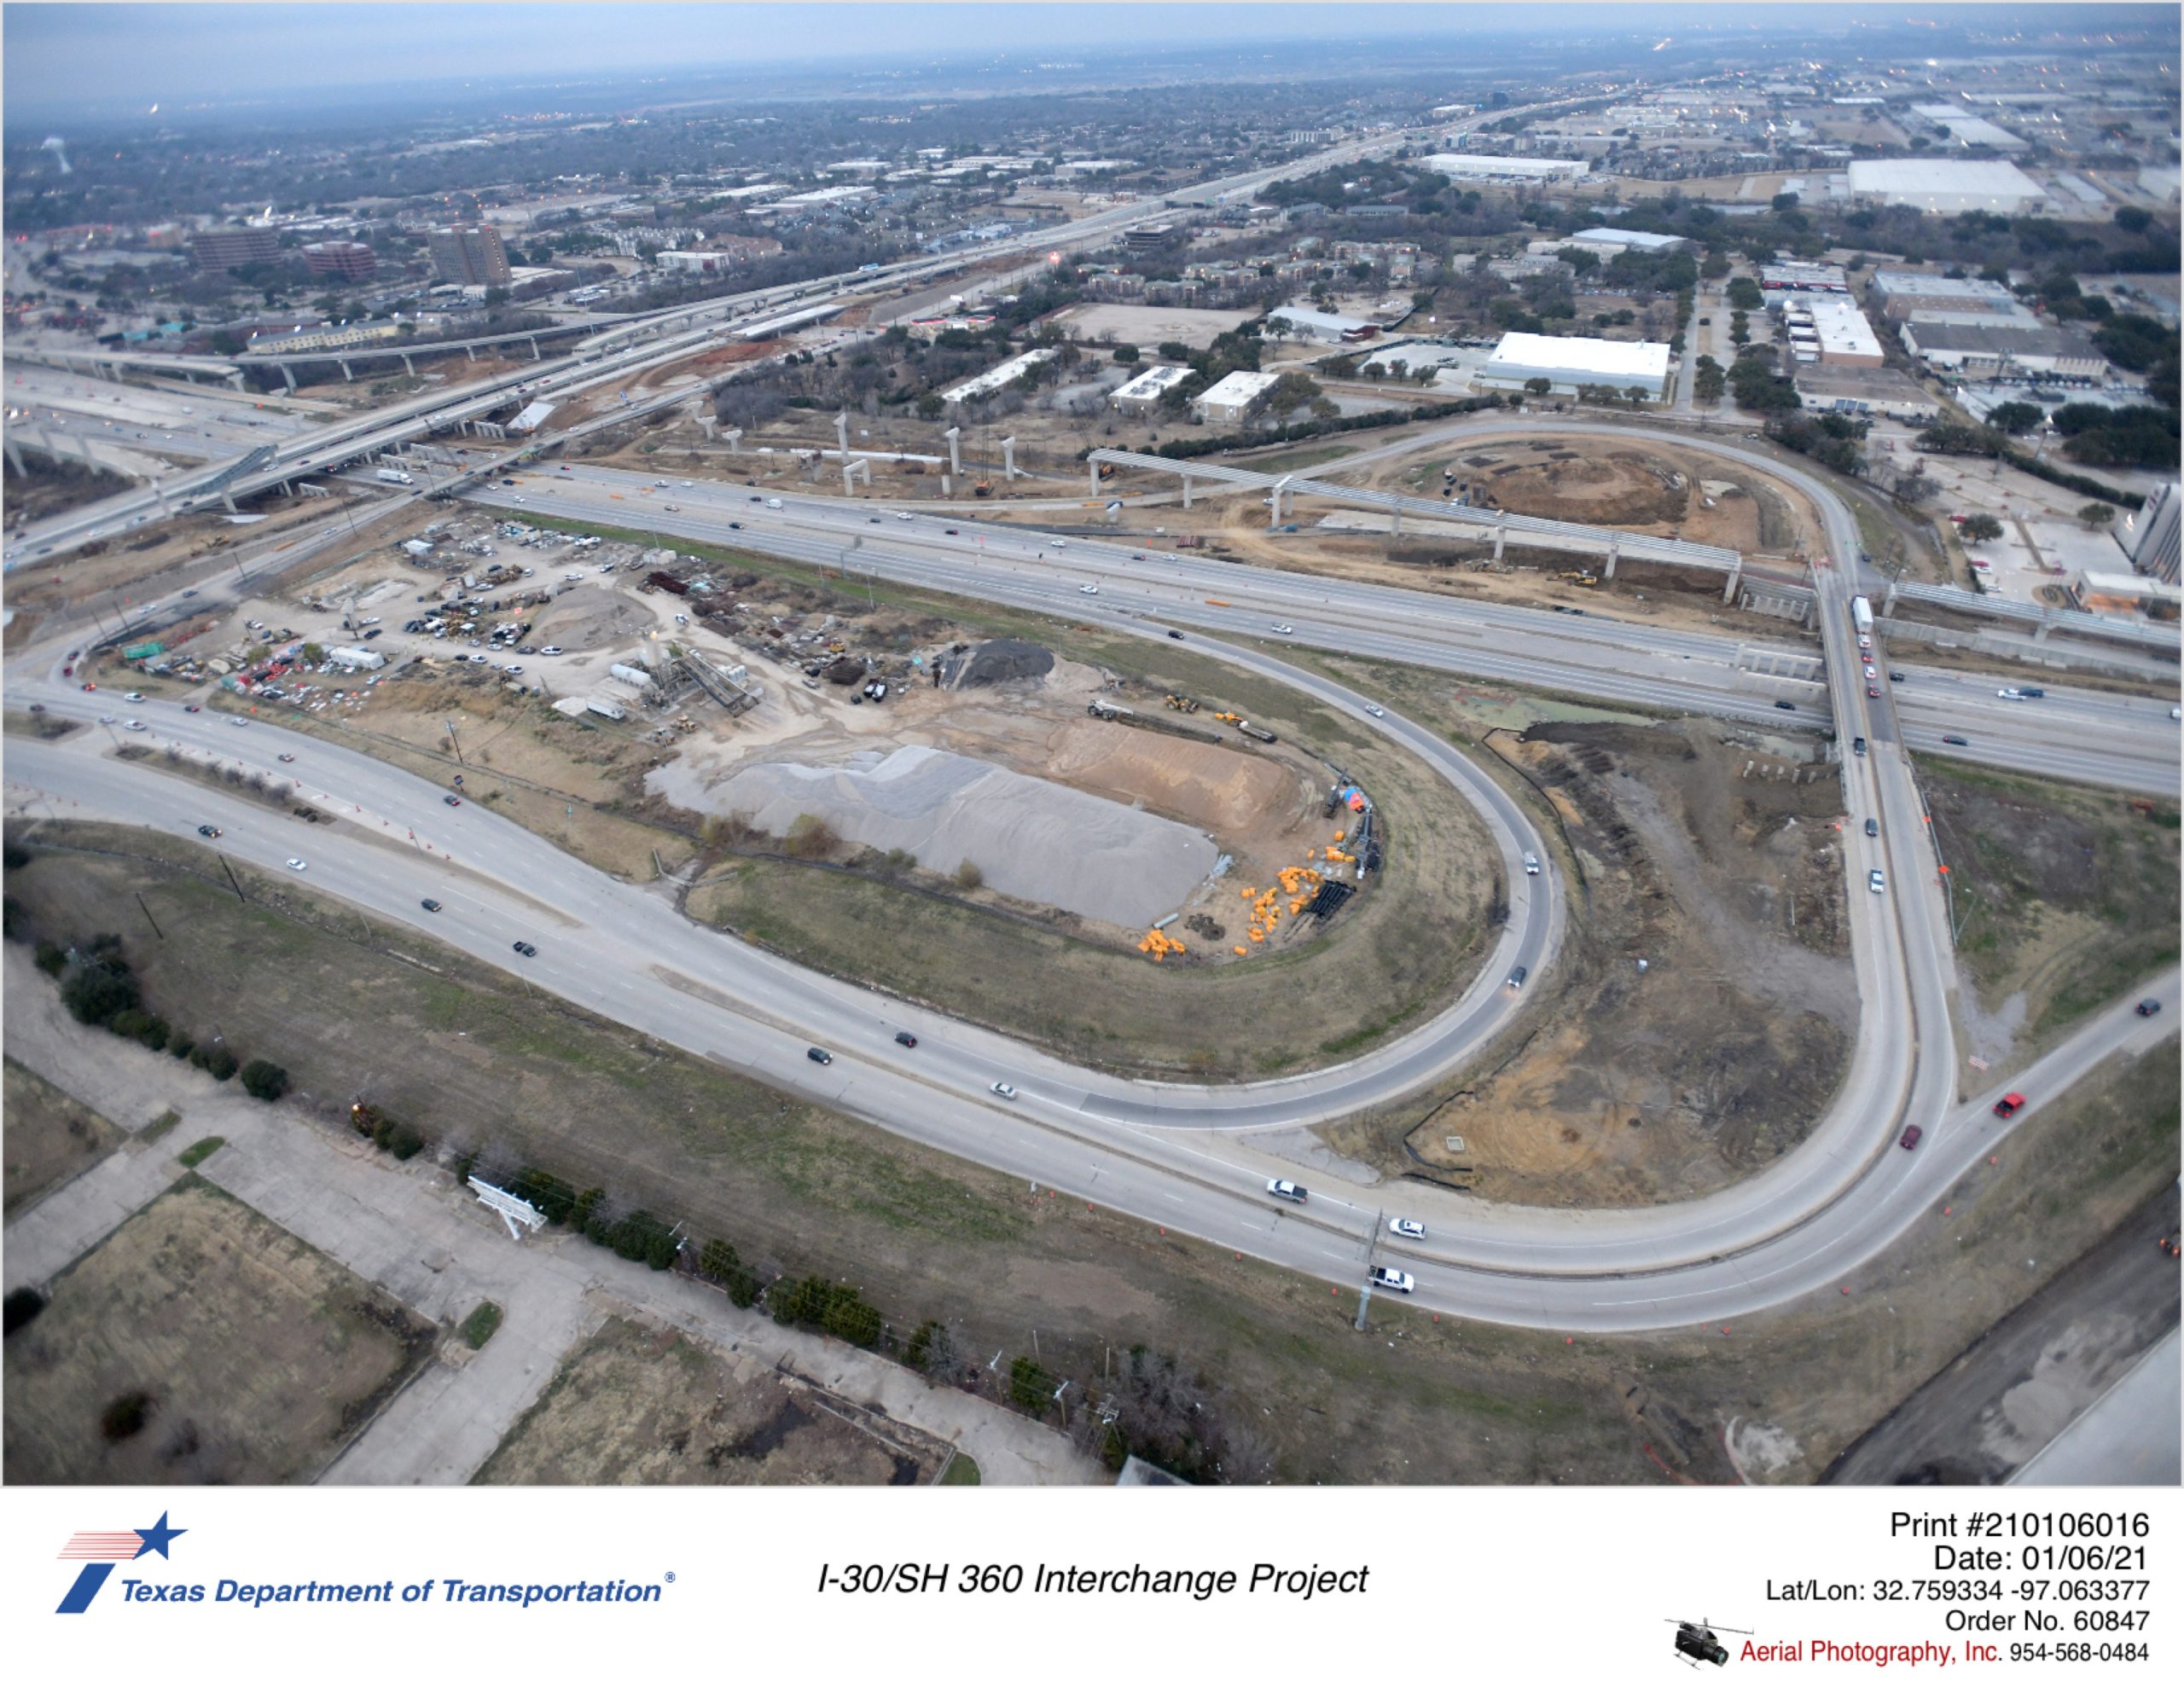 I-30/SH 360 interchange looking northwest. Construction on north side of I-30 for new direct connectors for west-to-north and west-to-south shown being constructed.